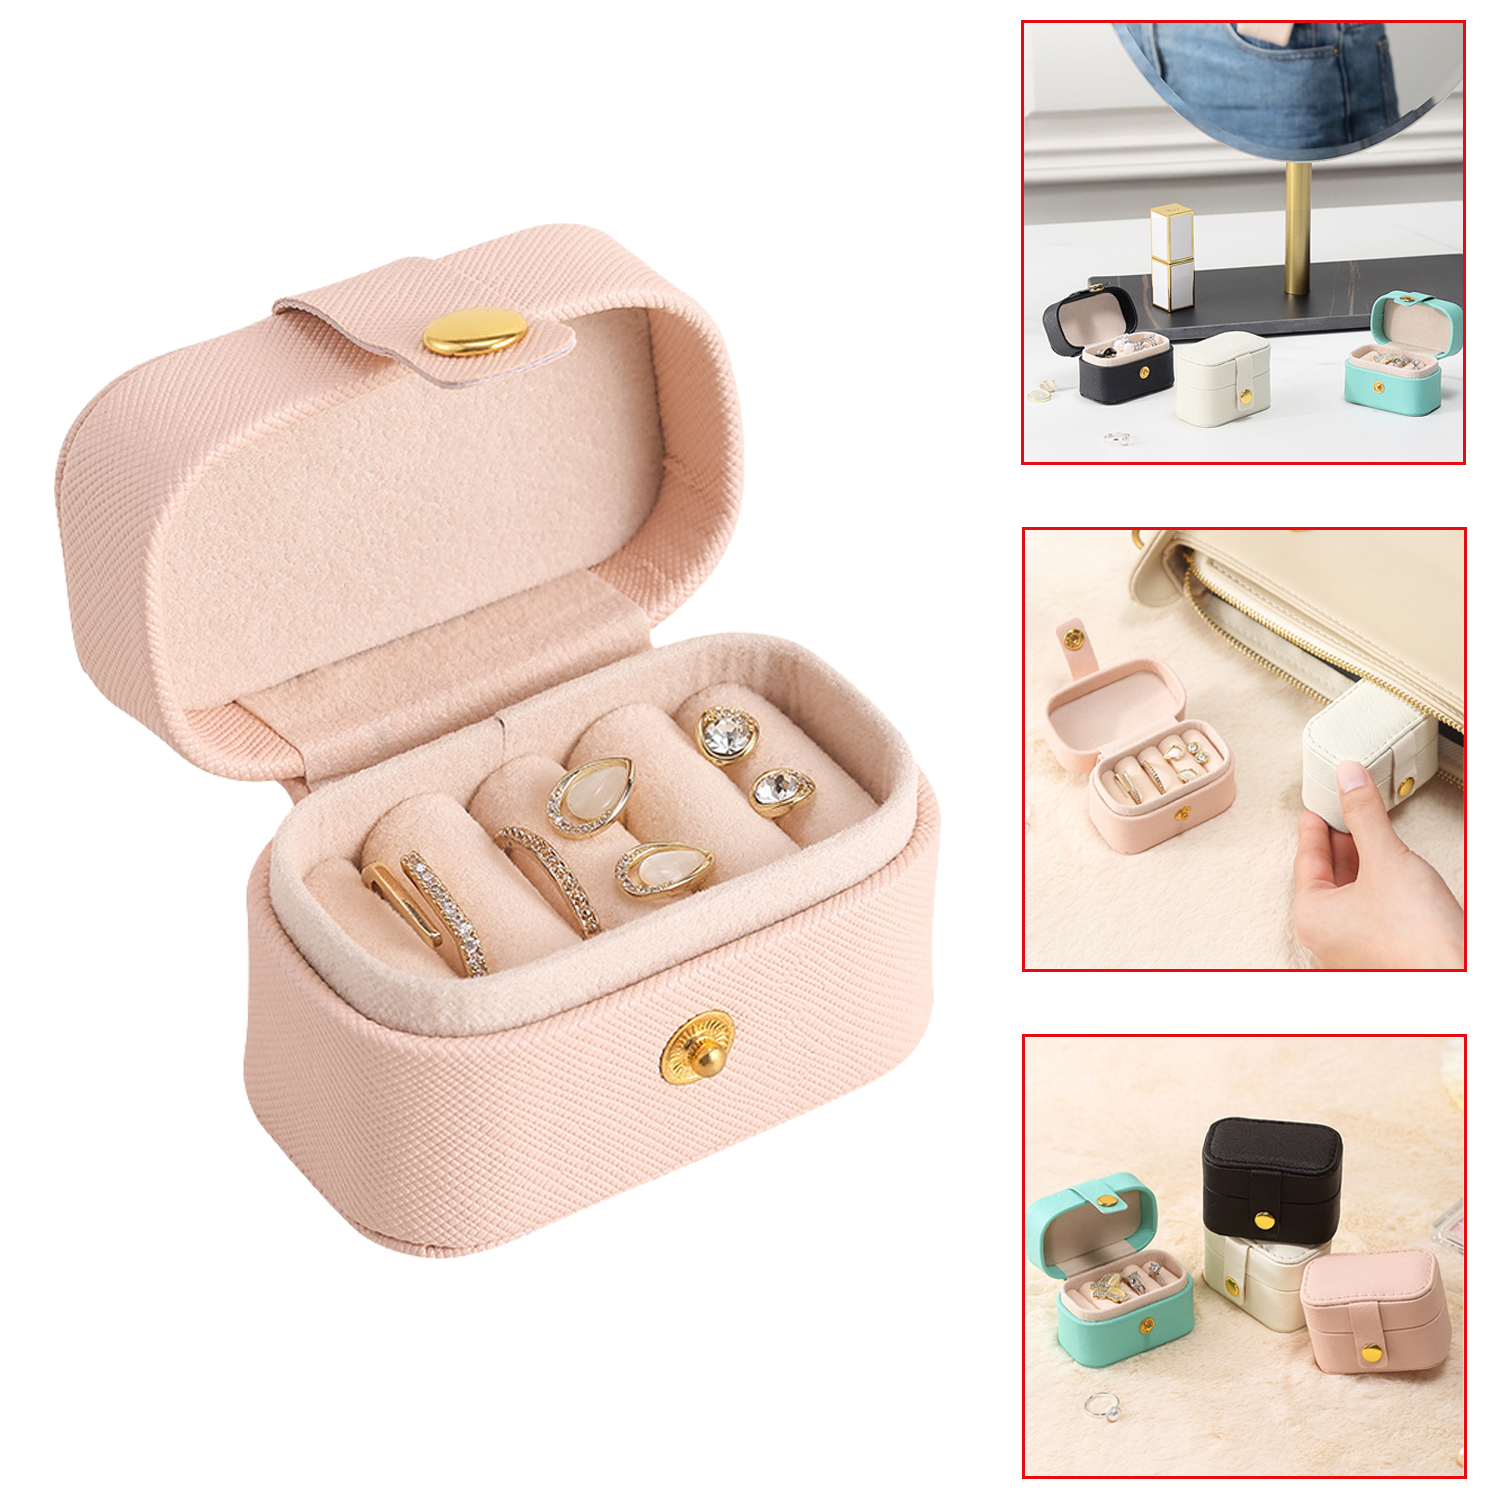 Mini Portable Jewelry Box Jewelry Organizer Display Travel Rings Boxes Button Leather Storage Button Jewelers Gift